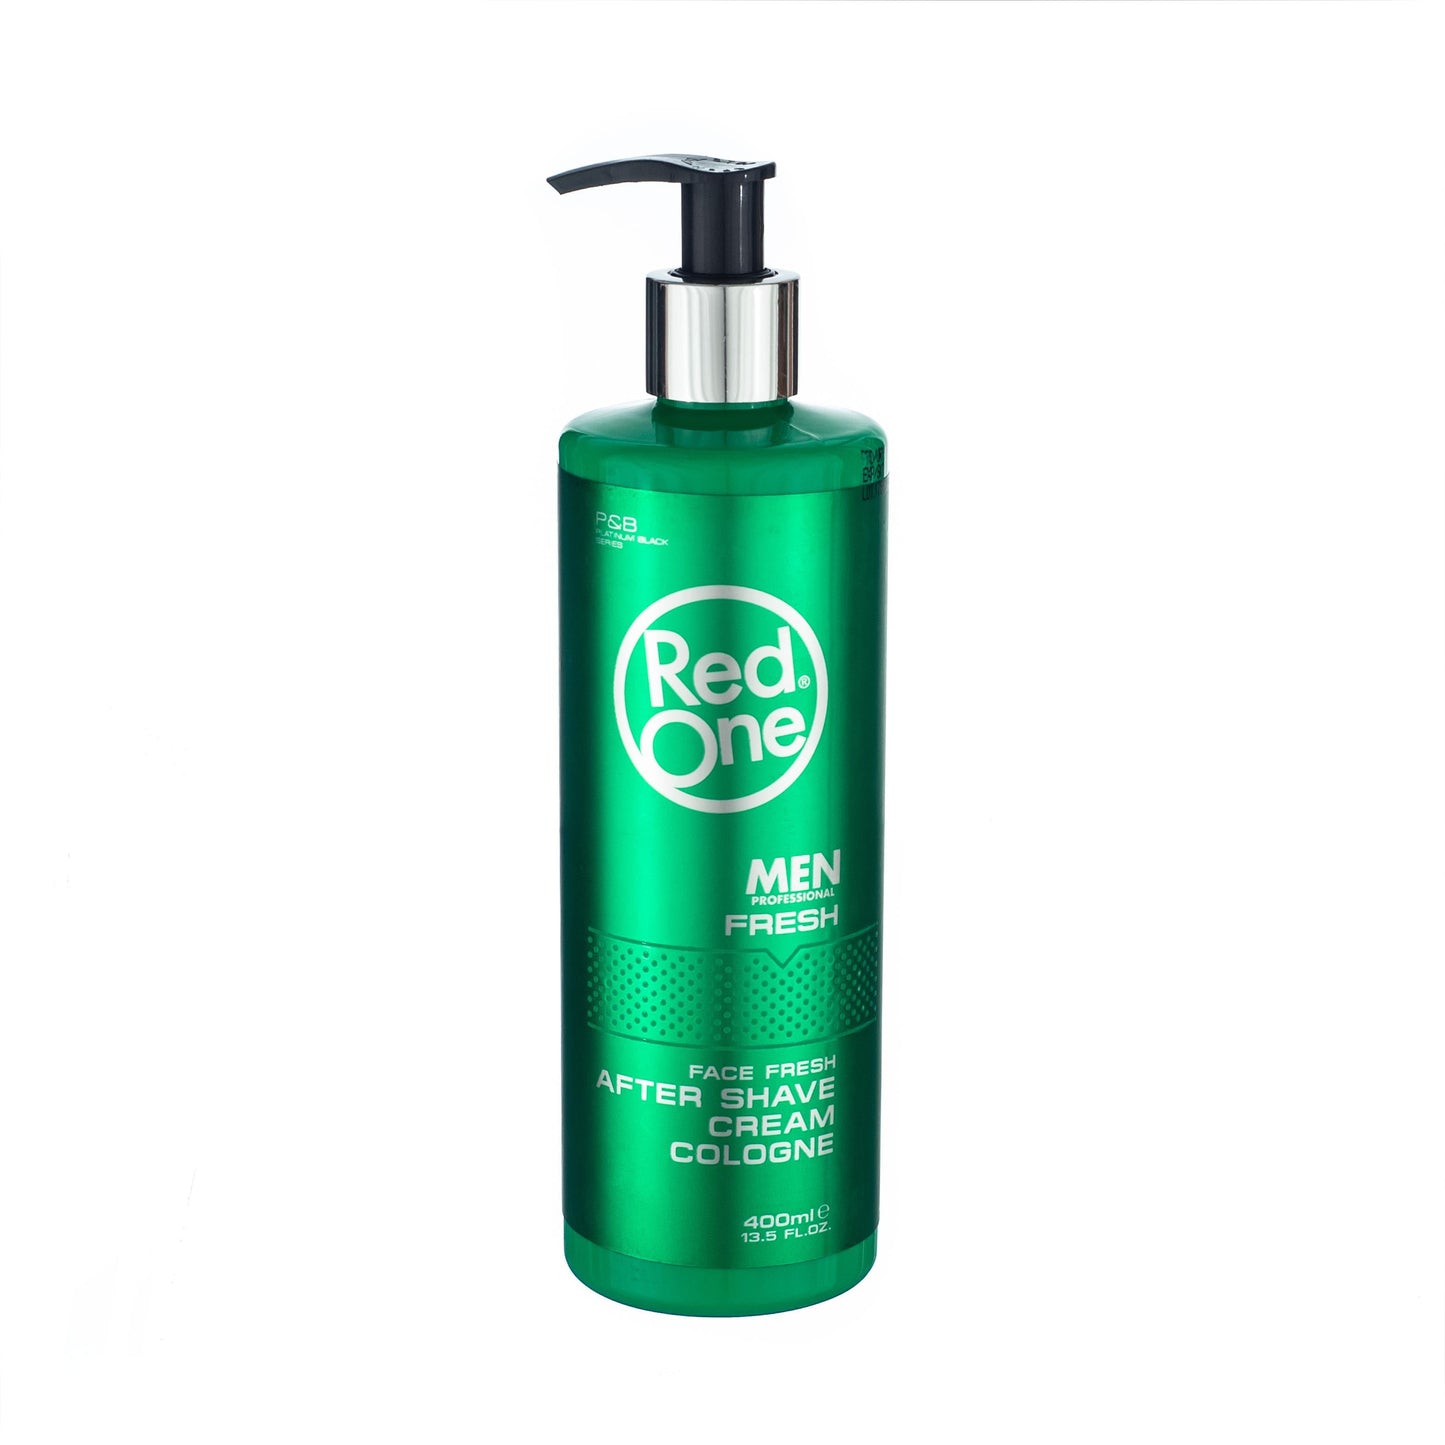 RedOne After Shave Cream Cologne Fresh